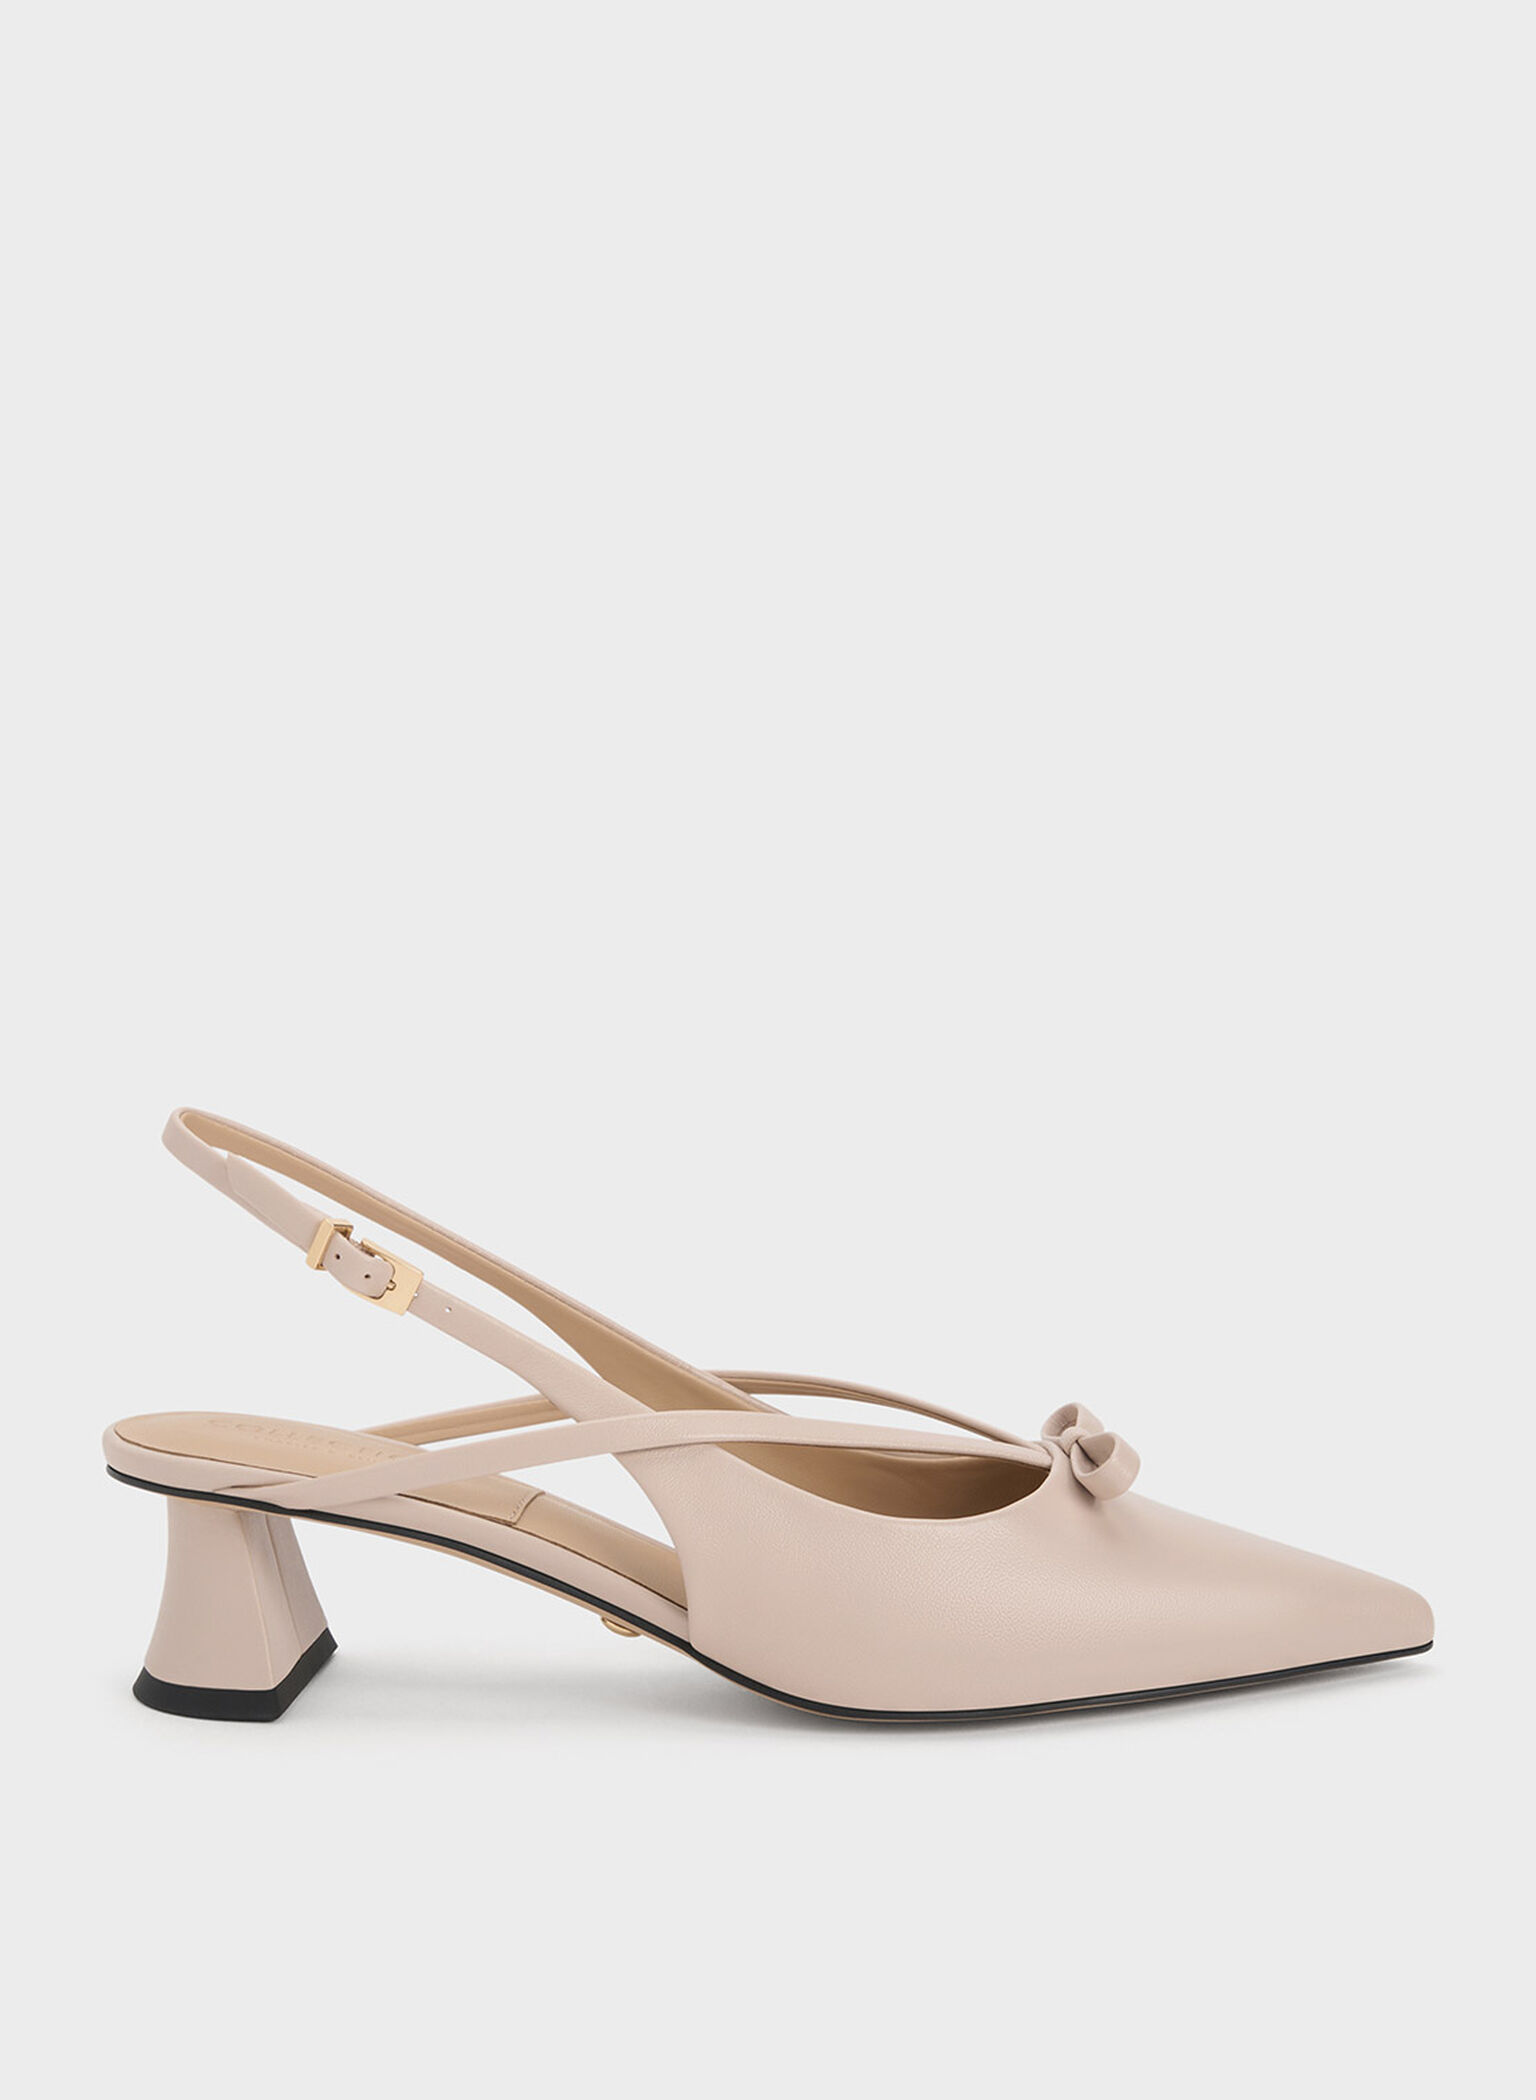 Nude Leather Bow Strappy Slingback Pumps - CHARLES & KEITH US